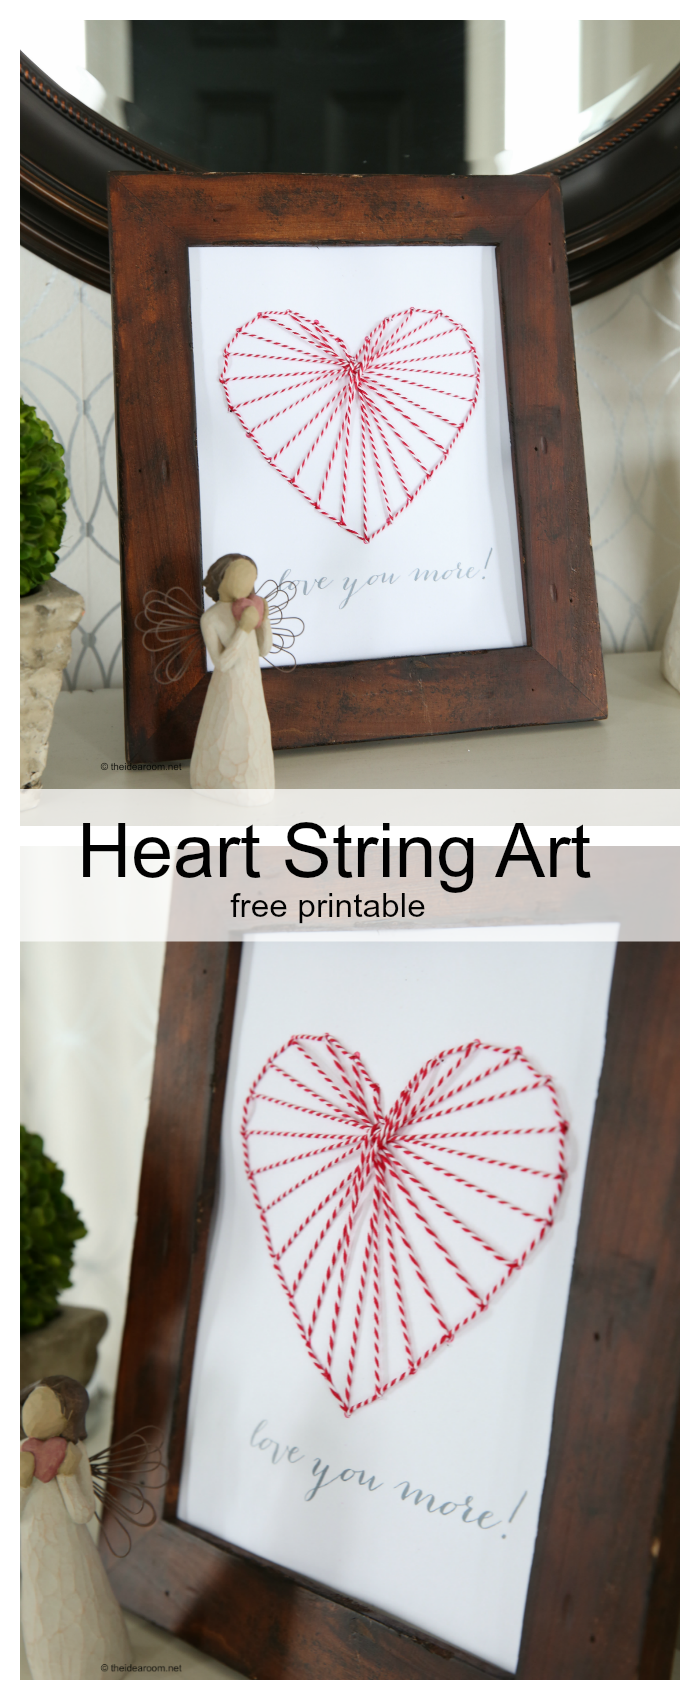 CHOOSE YOUR STRING ART — Hearts for the Arts